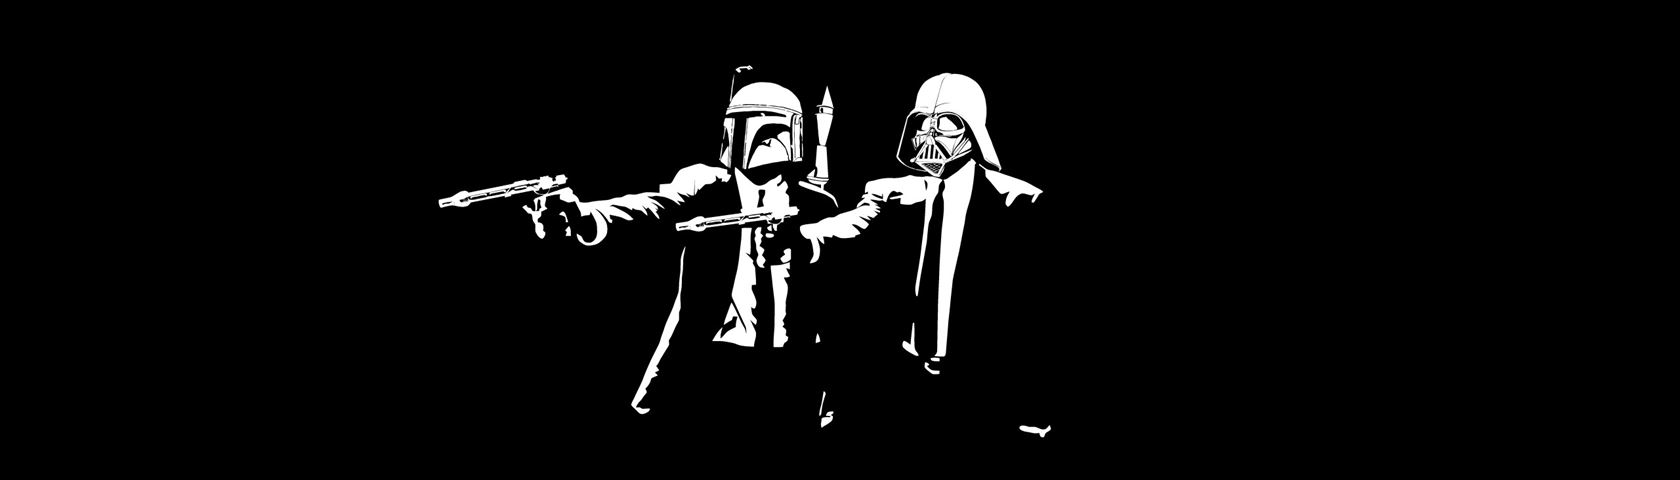 Star Wars Pulp Fiction • Images • WallpaperFusion by Binary Fortress ...